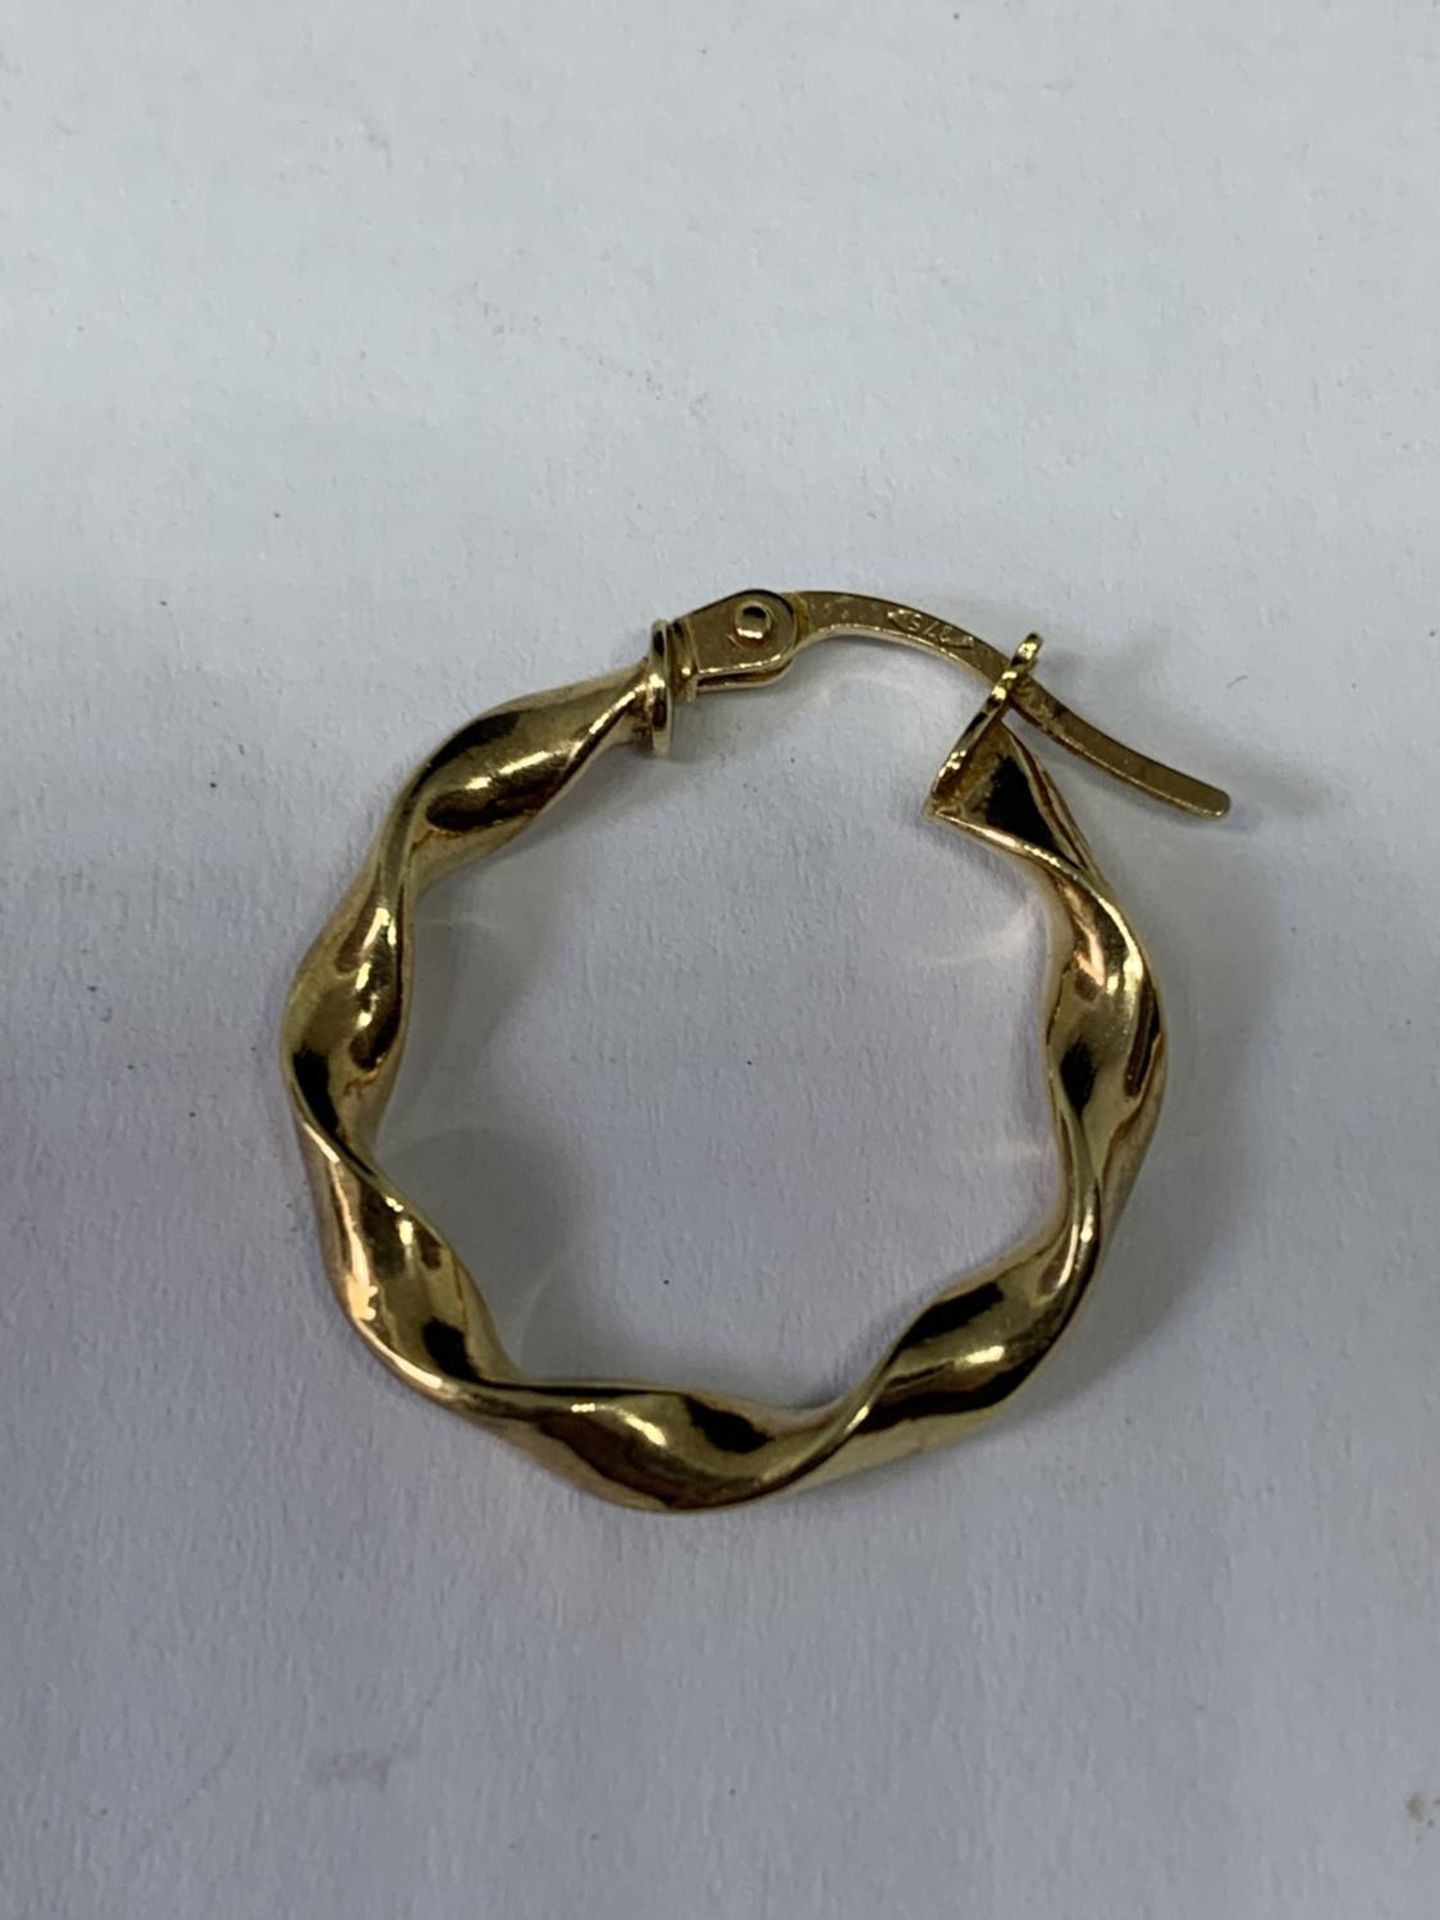 A PAIR OF MARKED 375 GOLD TWIST EARRINGS - Image 3 of 4